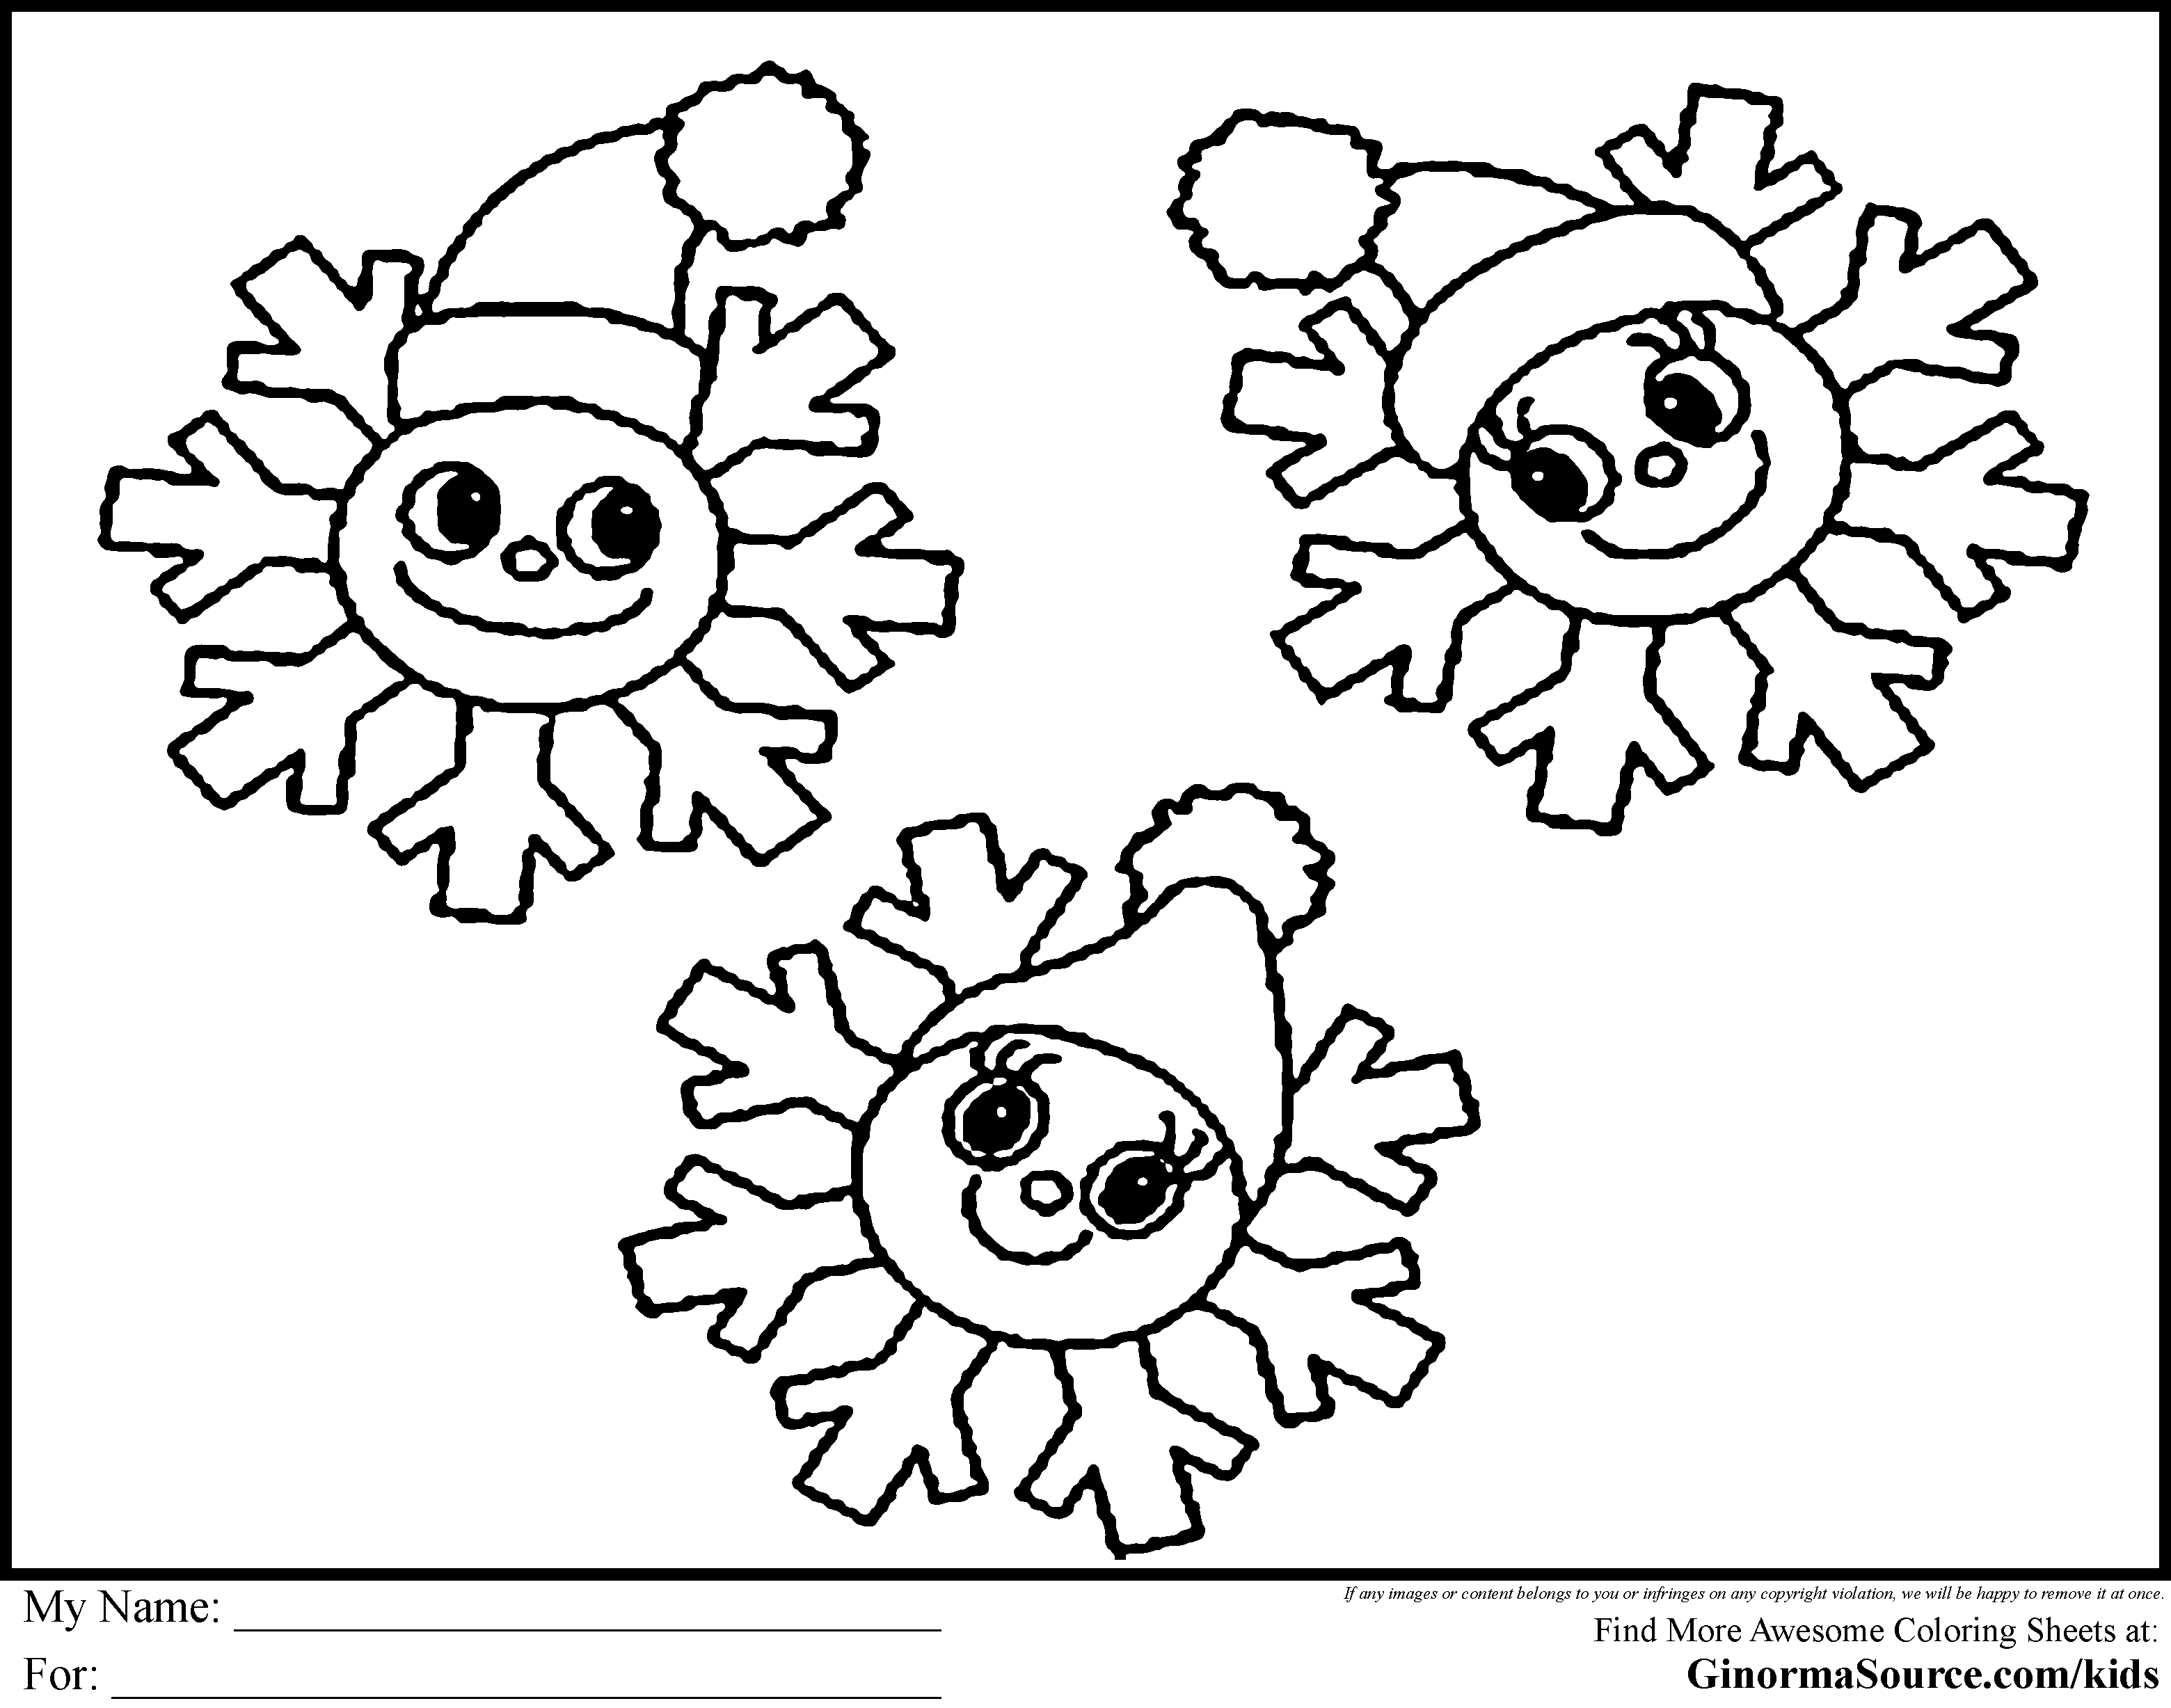 Snowflake Coloring Pages For Preschoolers Coloring Home